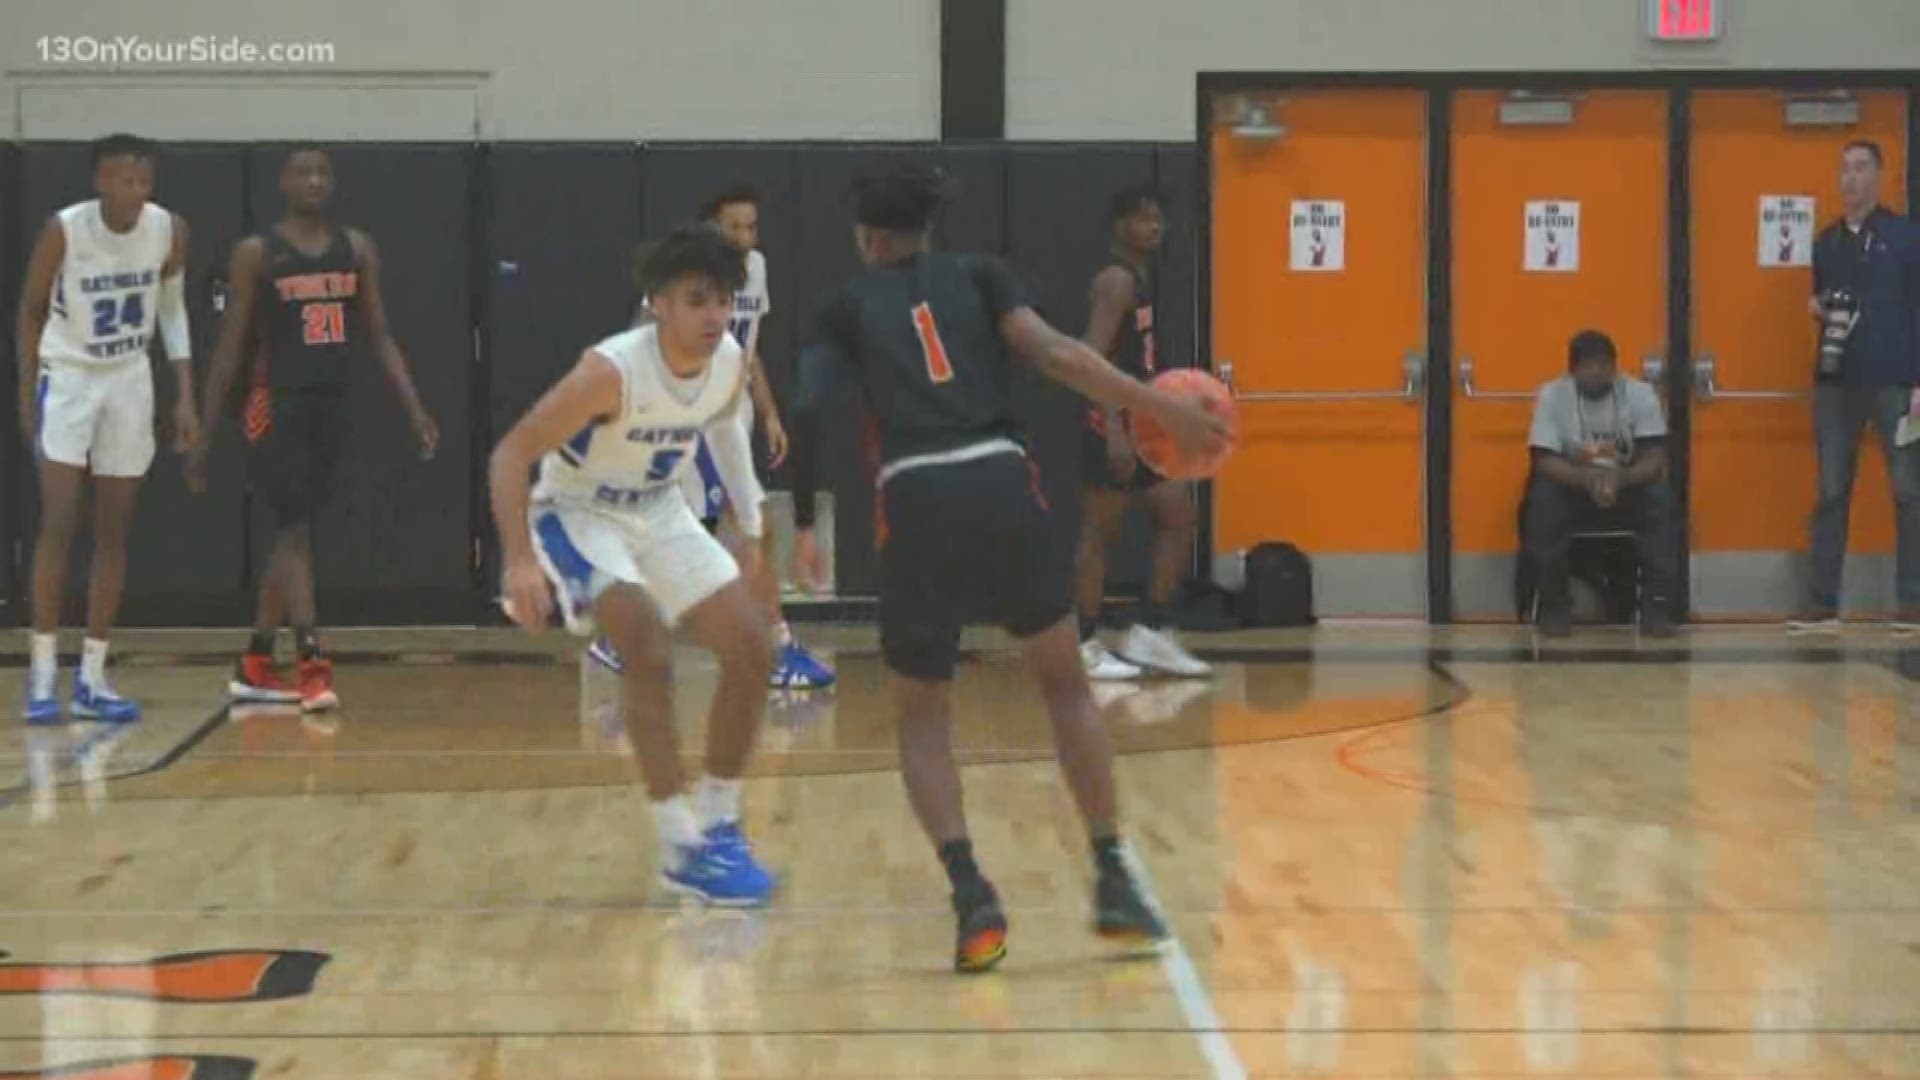 Saturday, six high school basketball teams faced off in the Floyd Mayweather Basketball Classic at Ottawa Hills High School in Grand Rapids.